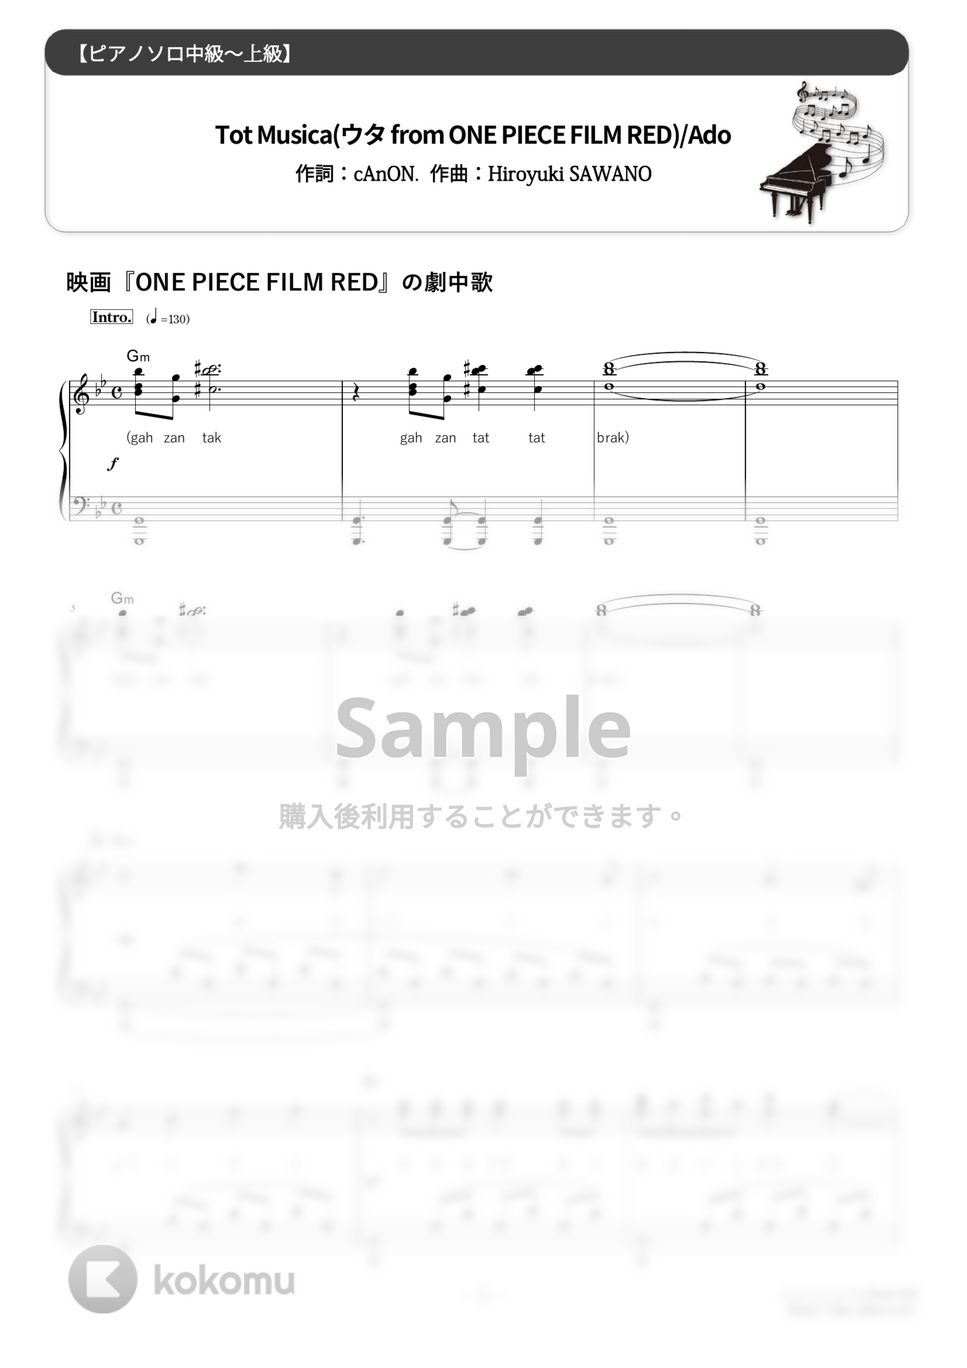 Ado - Tot Musica (難易度:★★★★☆/映画『ONE PIECE FILM RED』挿入歌) by Dさん